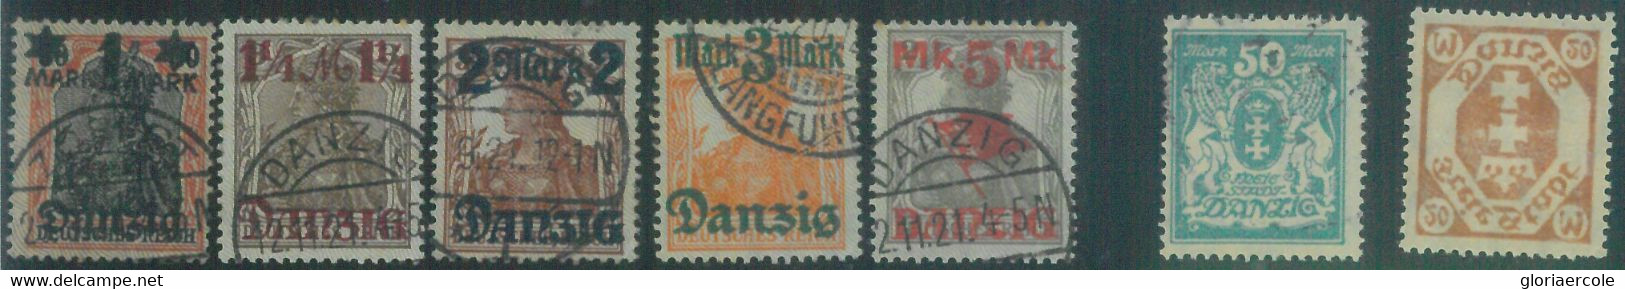 88258 - POLAND Danzig - STAMP  - Small  Lot Of USED STAMPS - Occupazioni